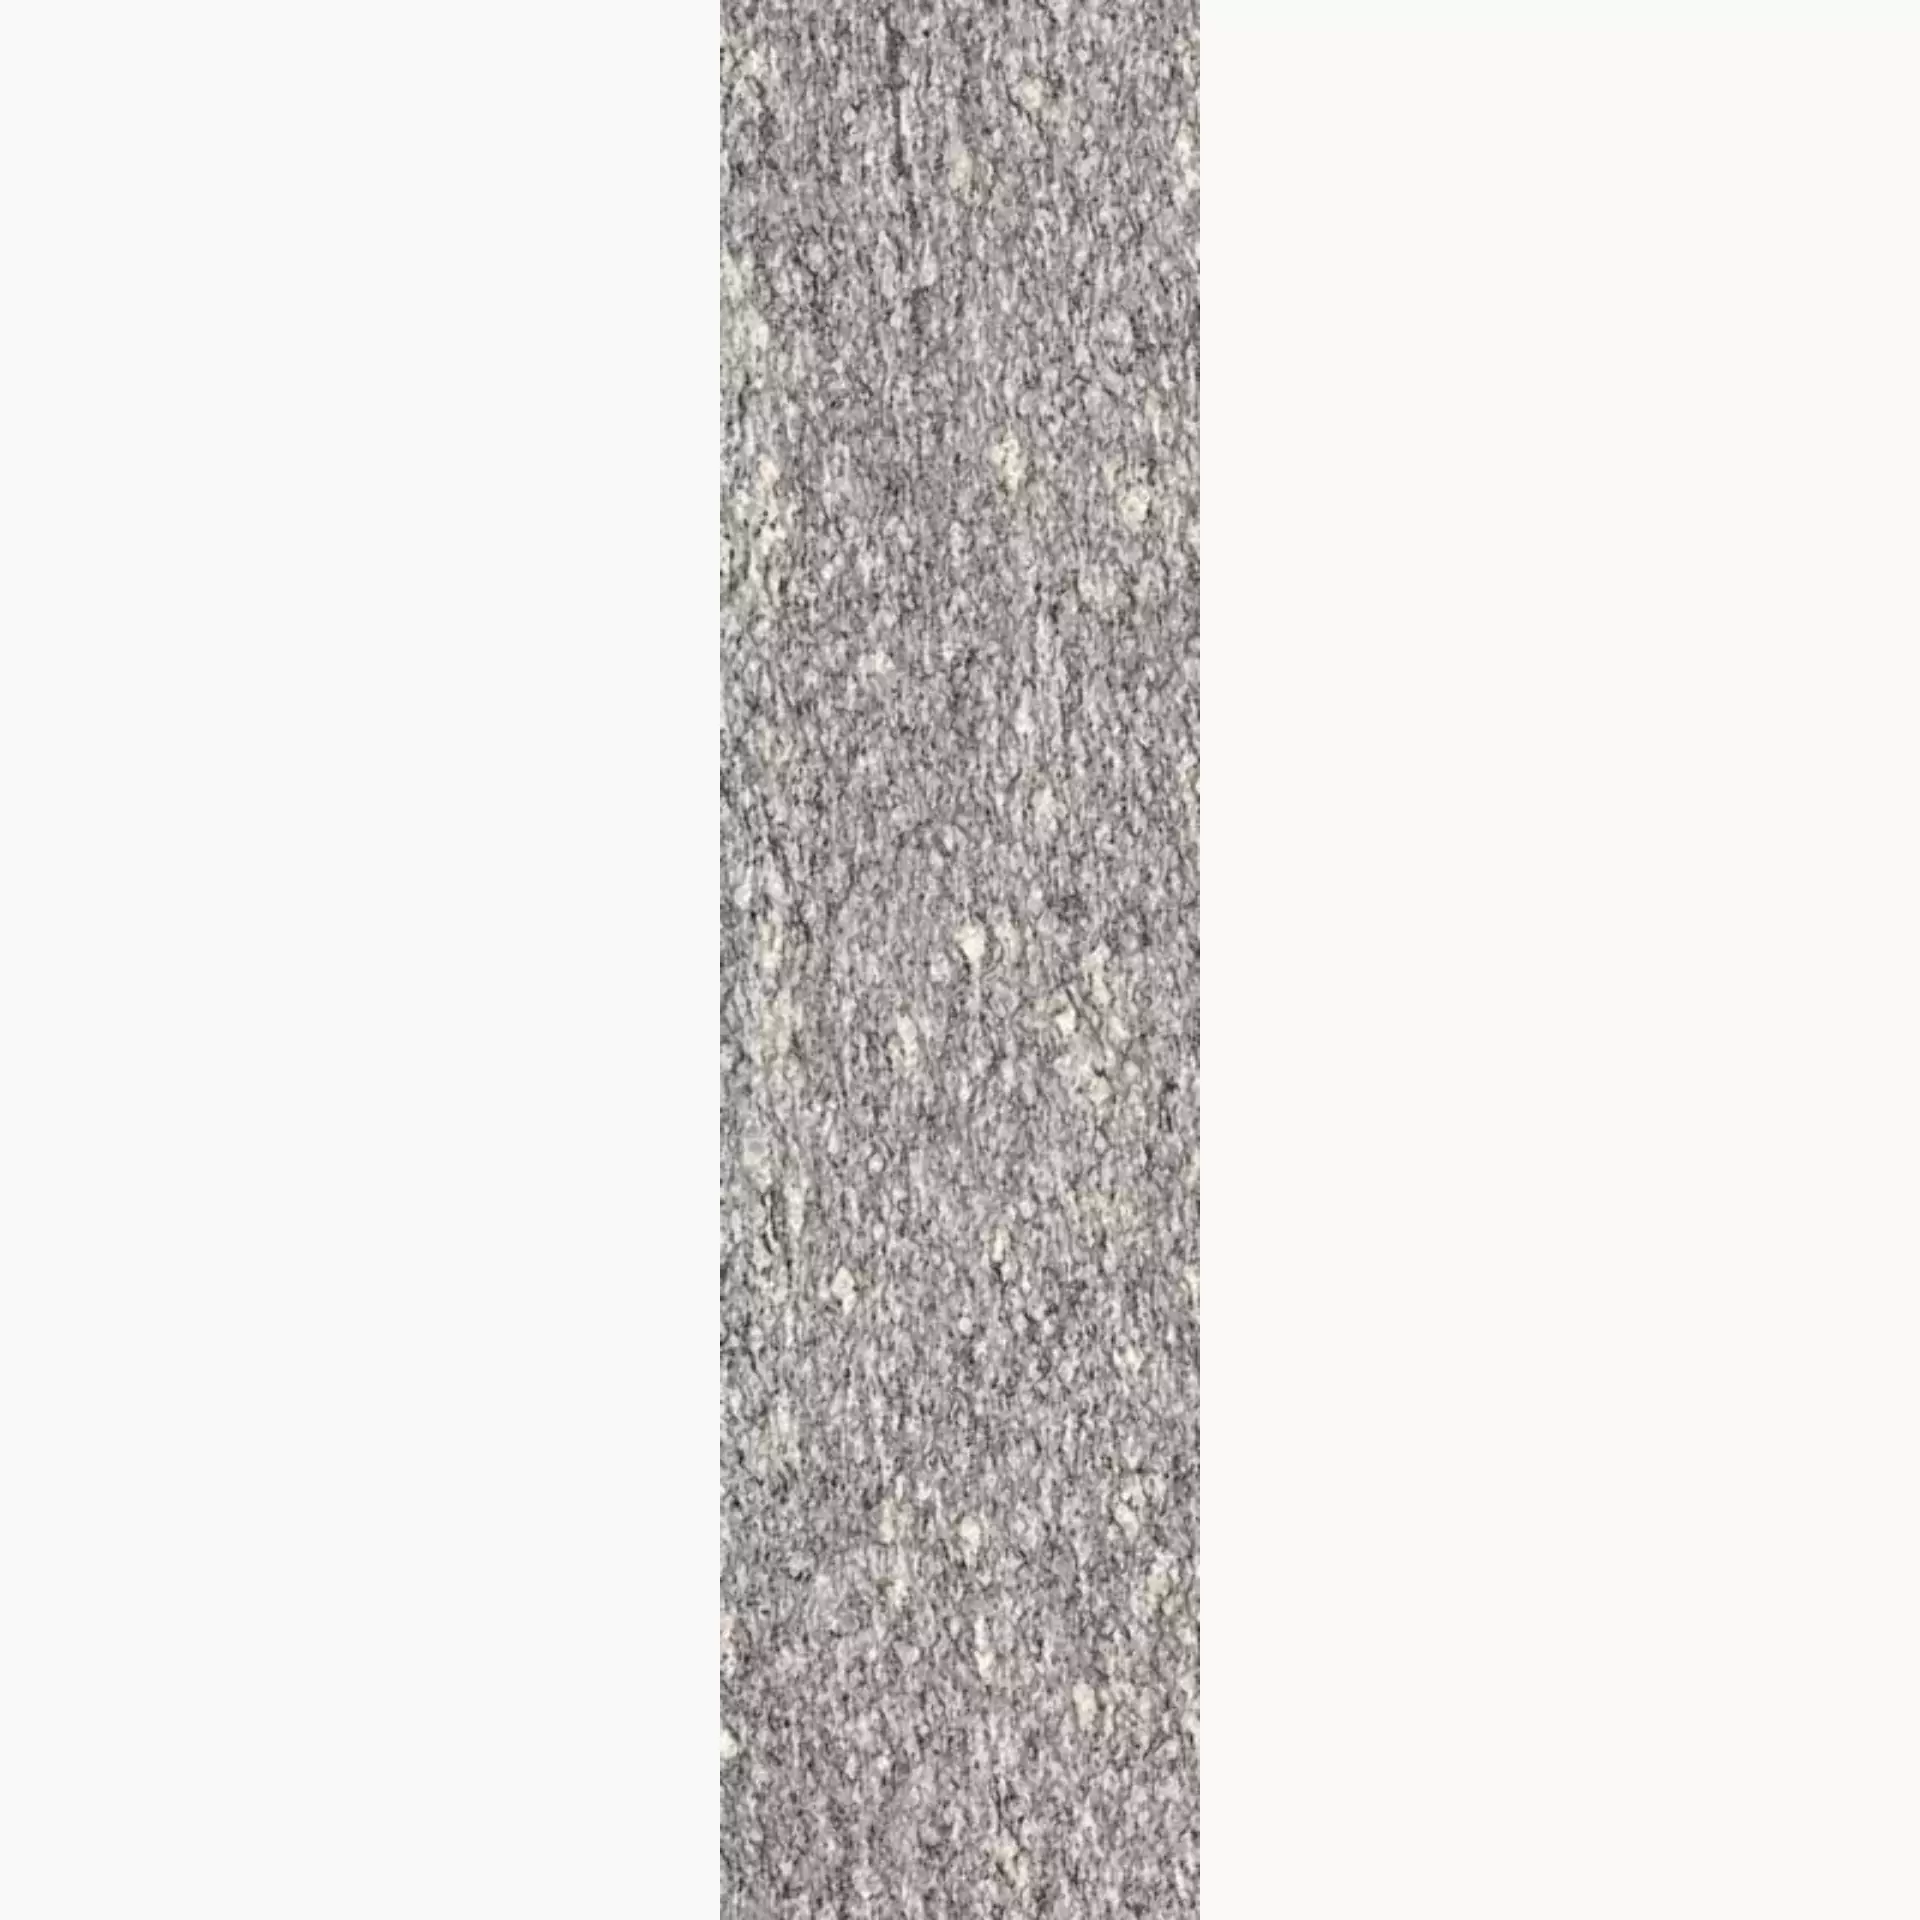 Sant Agostino Unionstone London Grey Natural CSALOGRY15 15x60cm rectified 10mm